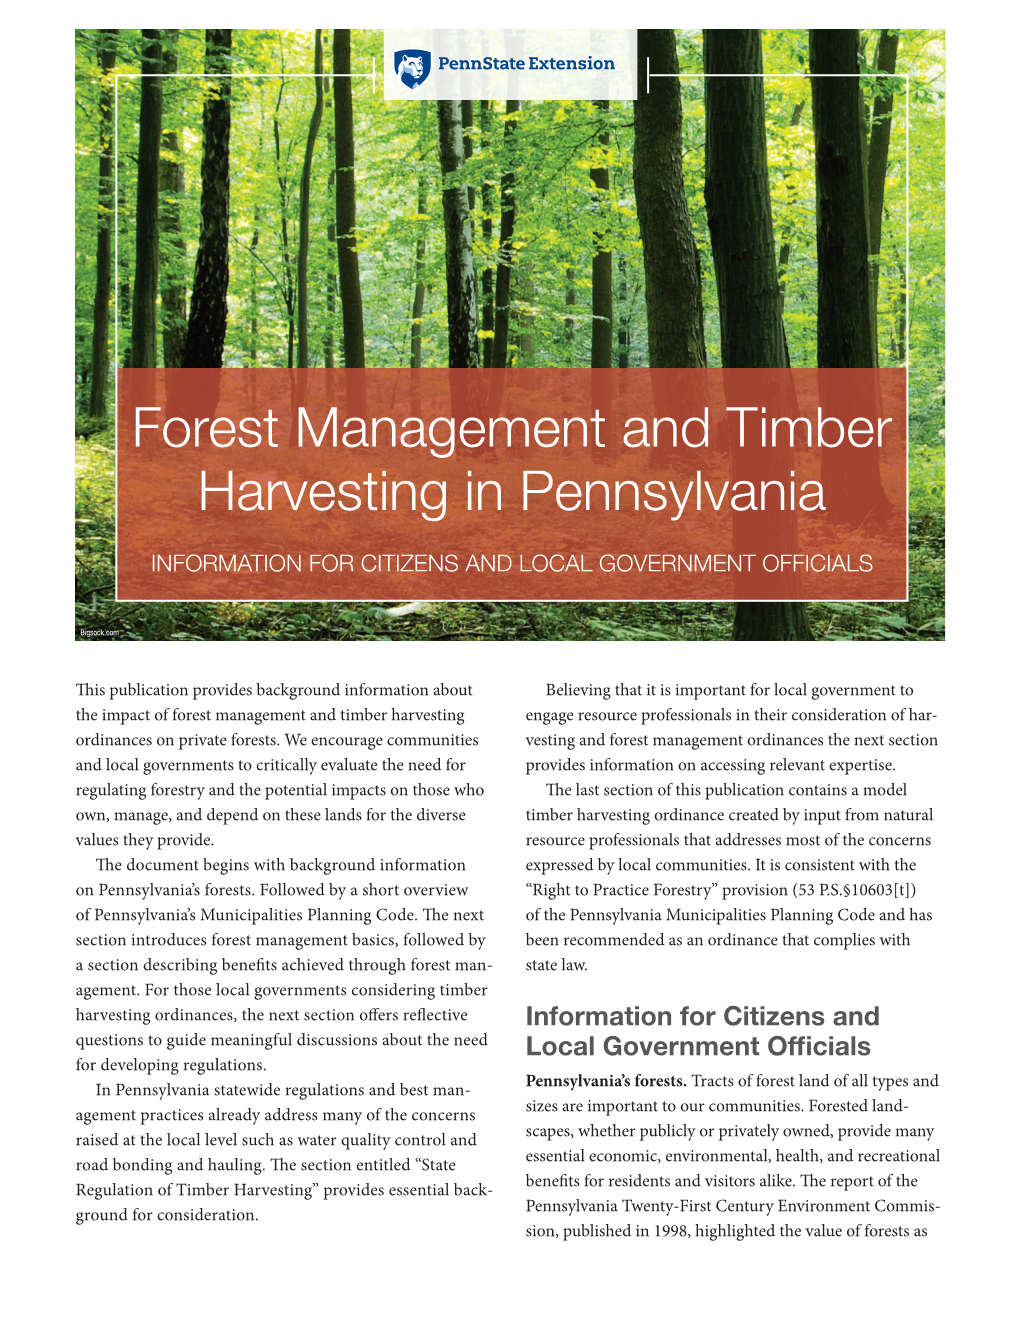 Forest Management and Timber Harvesting in Pennsylvania